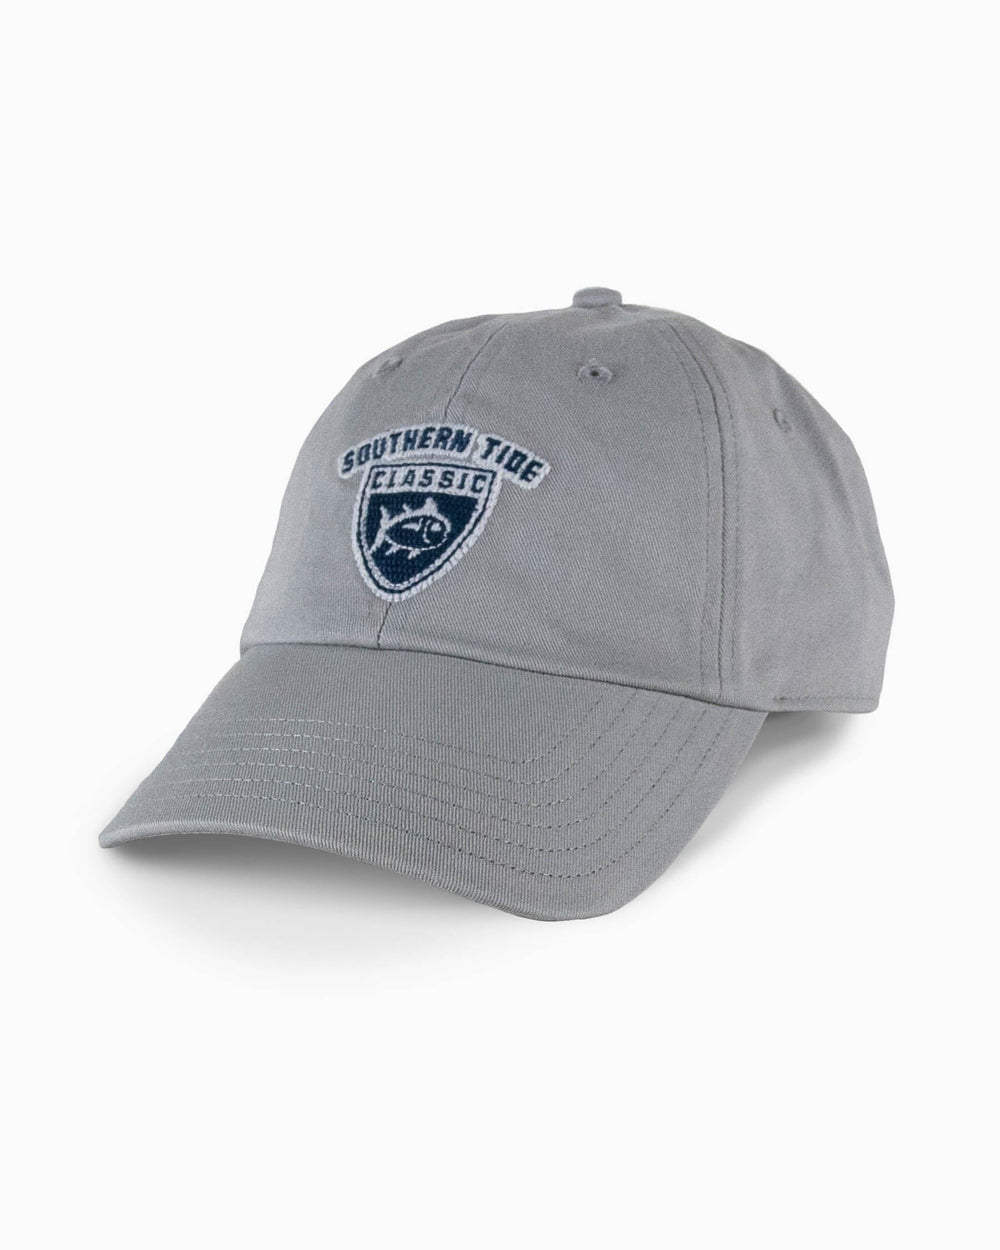 The front view of the Southern Tide Southern Tide Classic Hat by Southern Tide - Grey